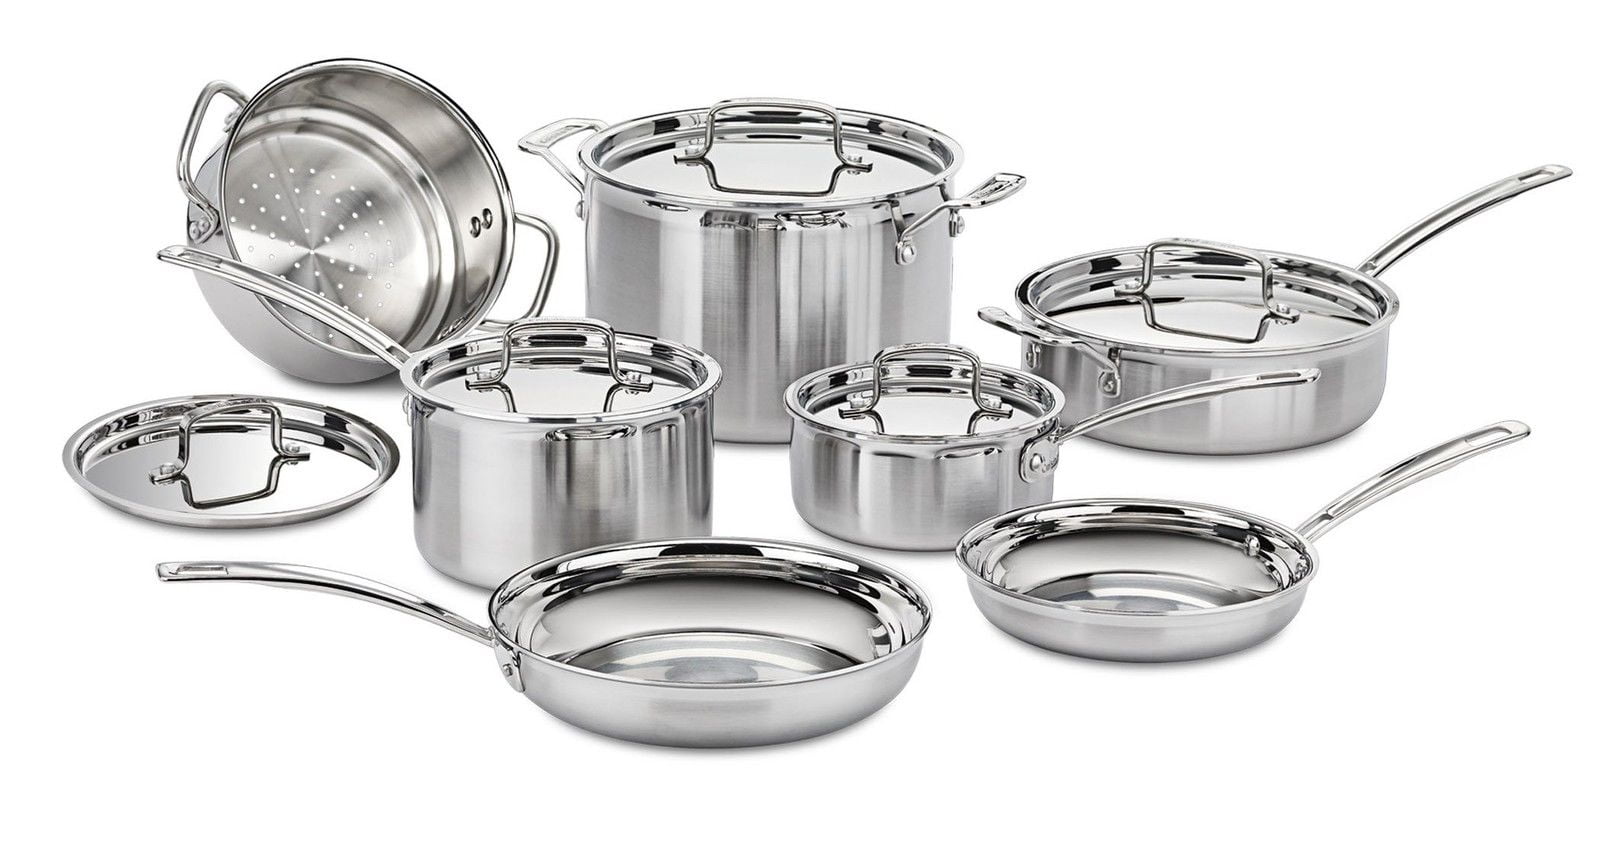 Cuisinart MCP-12N Multiclad Pro Stainless Steel 12-Piece Cookware Set Cuisinart 12 Piece Stainless Steel Cookware Set